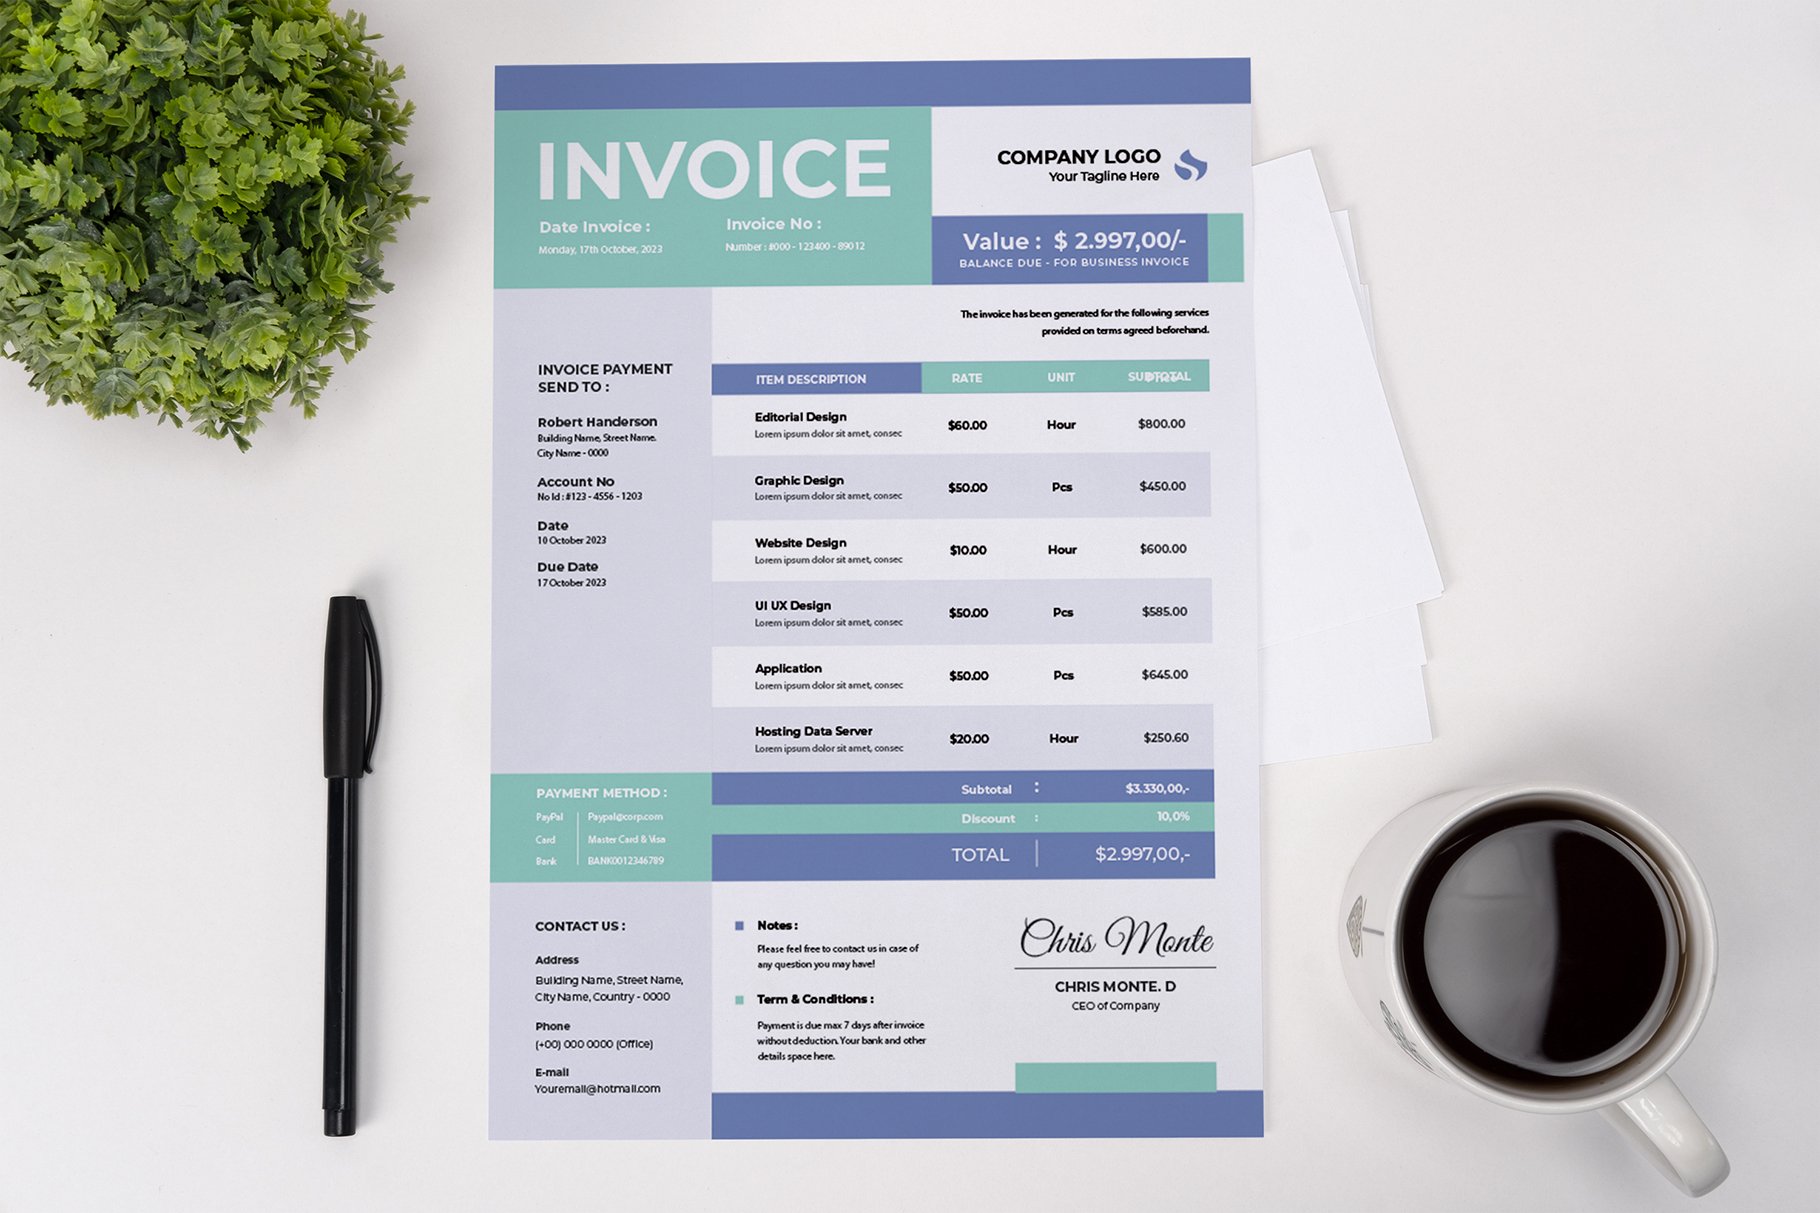 Clean Business Invoice cover image.